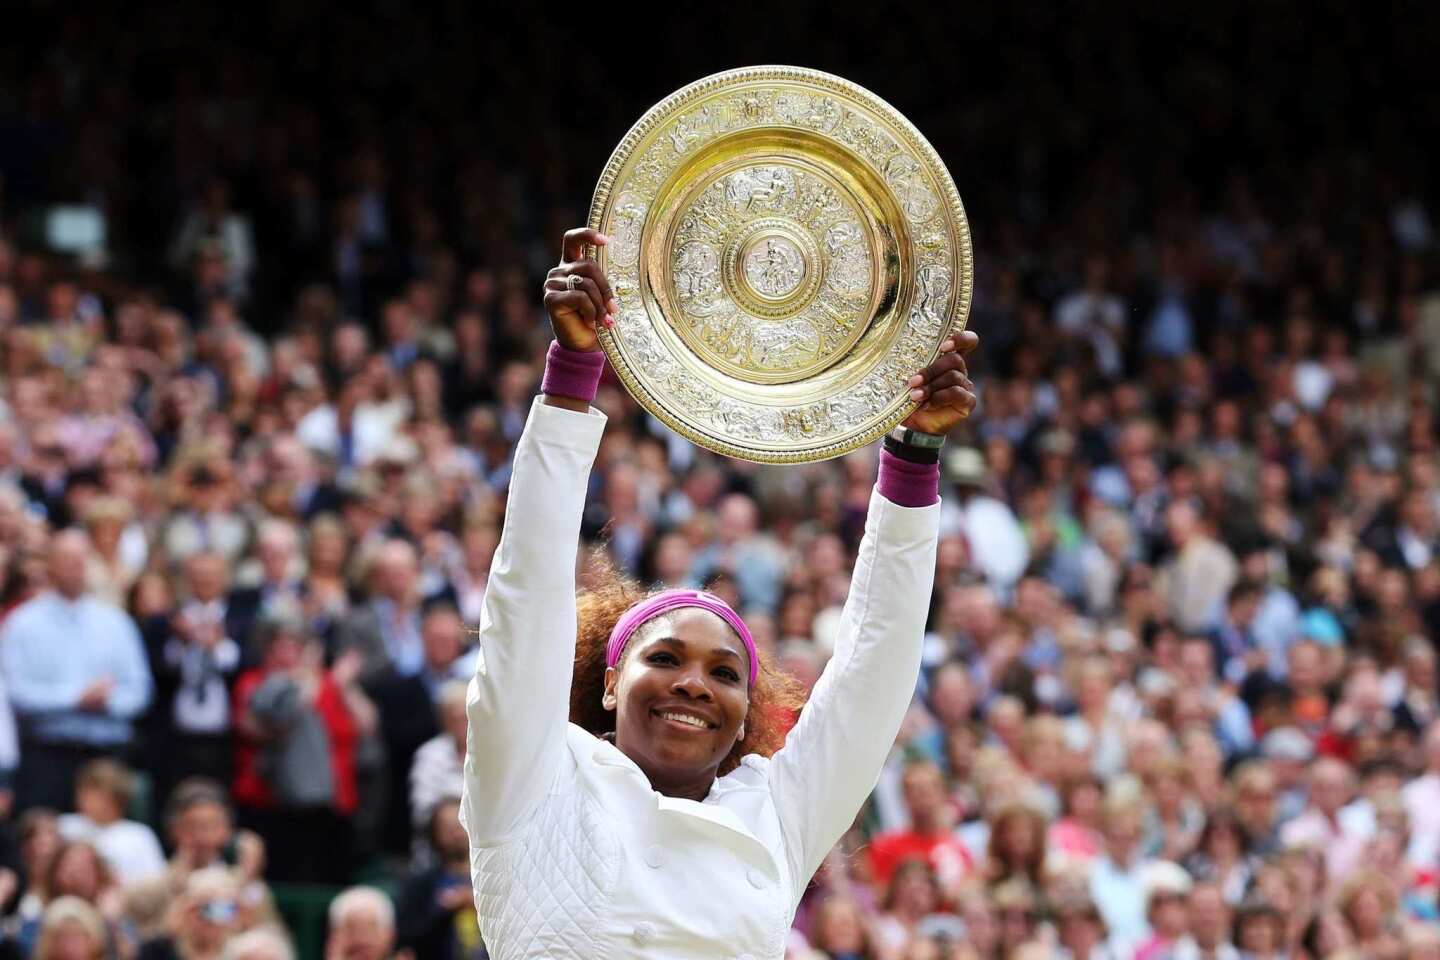 Serena Williams holds the winner's trophy aloft during the awards presentation after her three-set victory over Agnieszka Radwanska in the women's championship match at Wimbledon on Saturday.